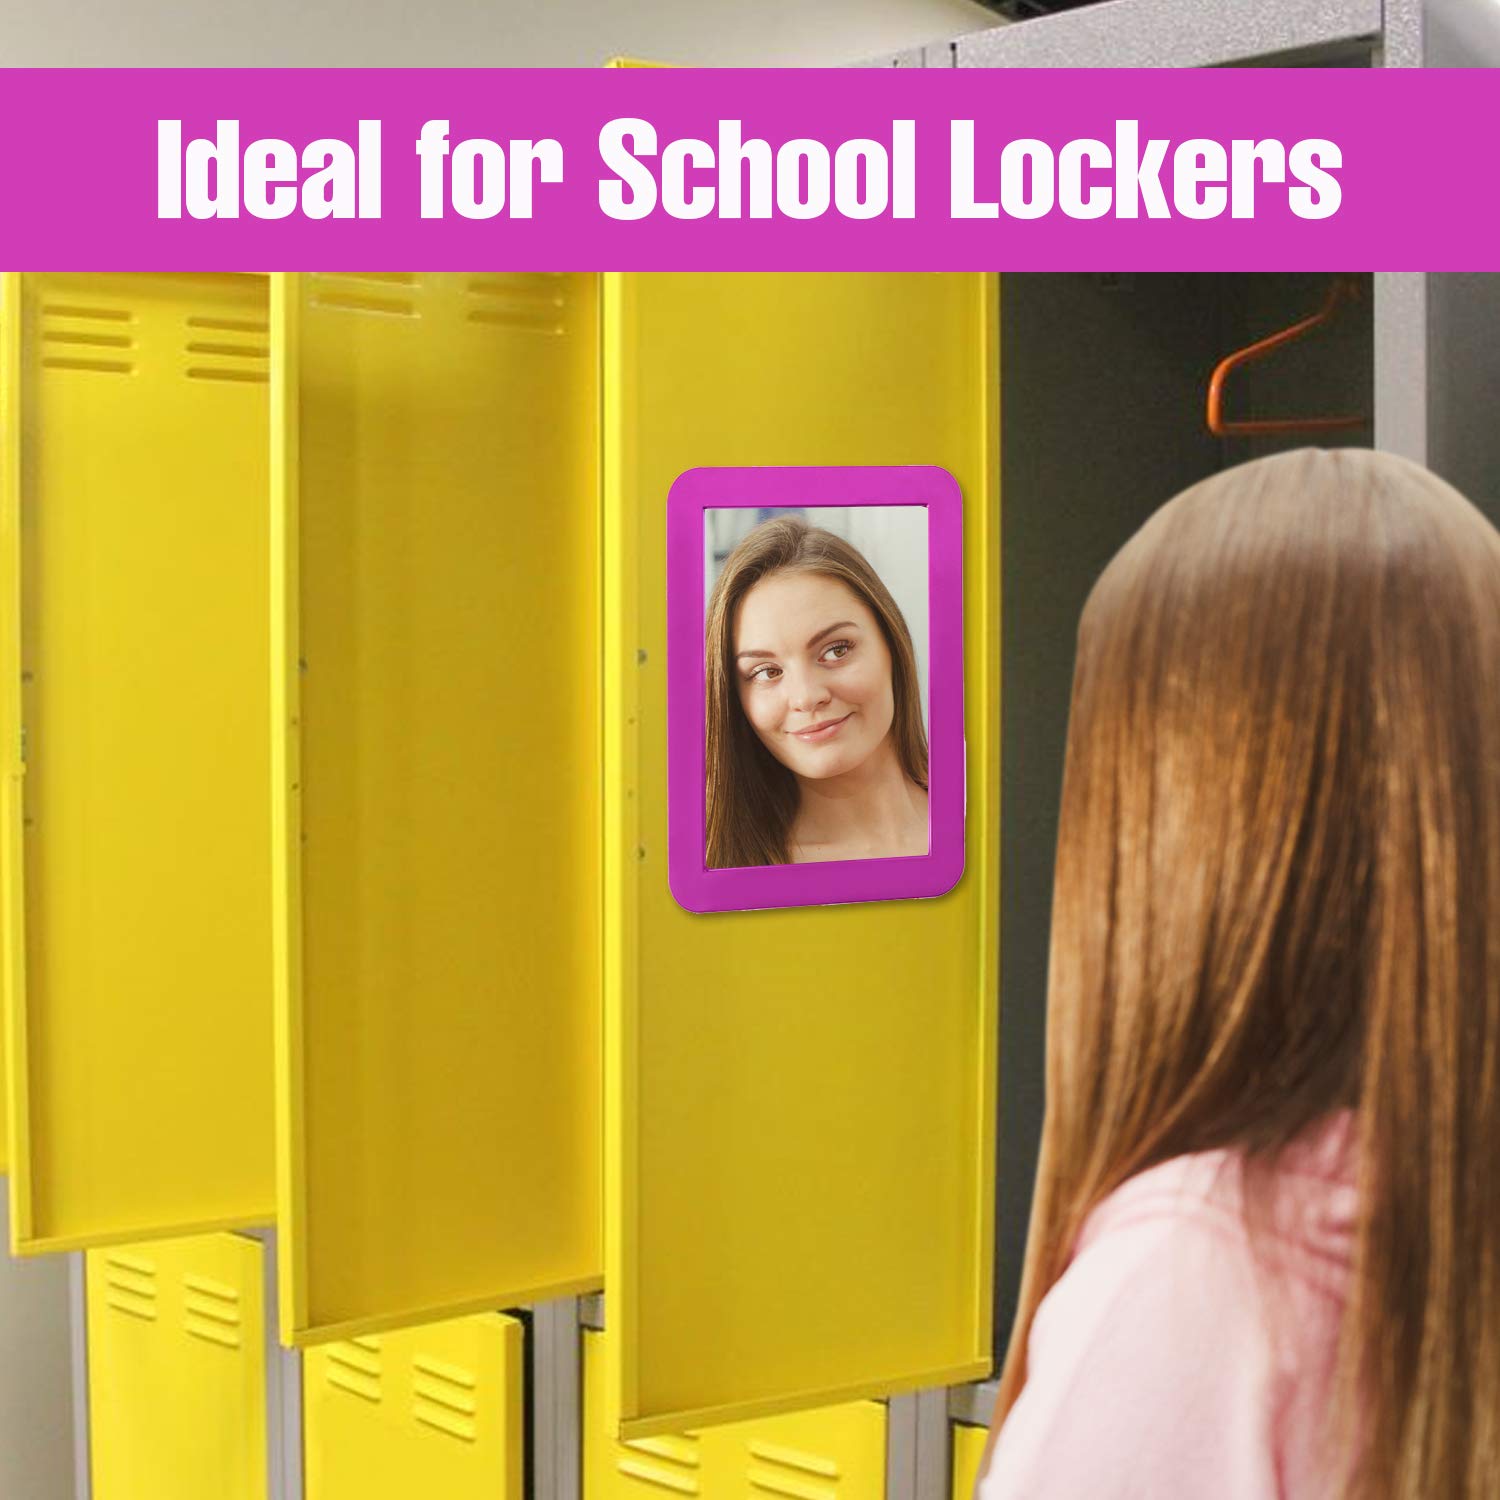 5 1/4 x 6 7/8 inch Magnetic Locker Mirror - Real Glass